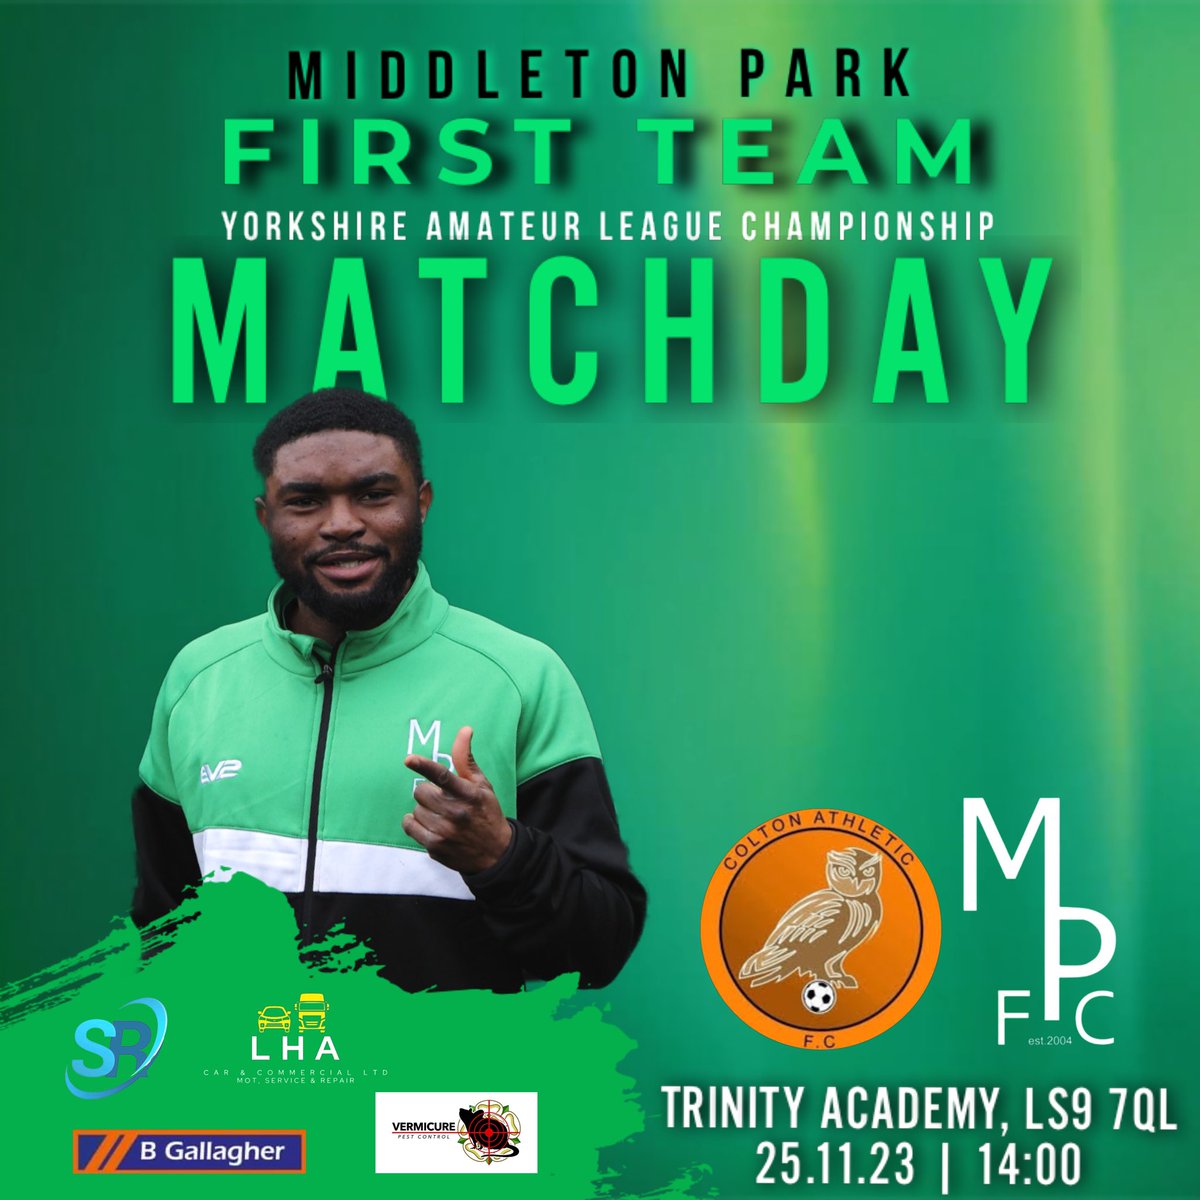 The first teams focus turns to Colton away in the league this afternoon!! 💚 ⚽️| @ColtonAFC v Middleton Park ⌚️| kick-off: 14:00 📍| Trafford Academy, LS9 7QL